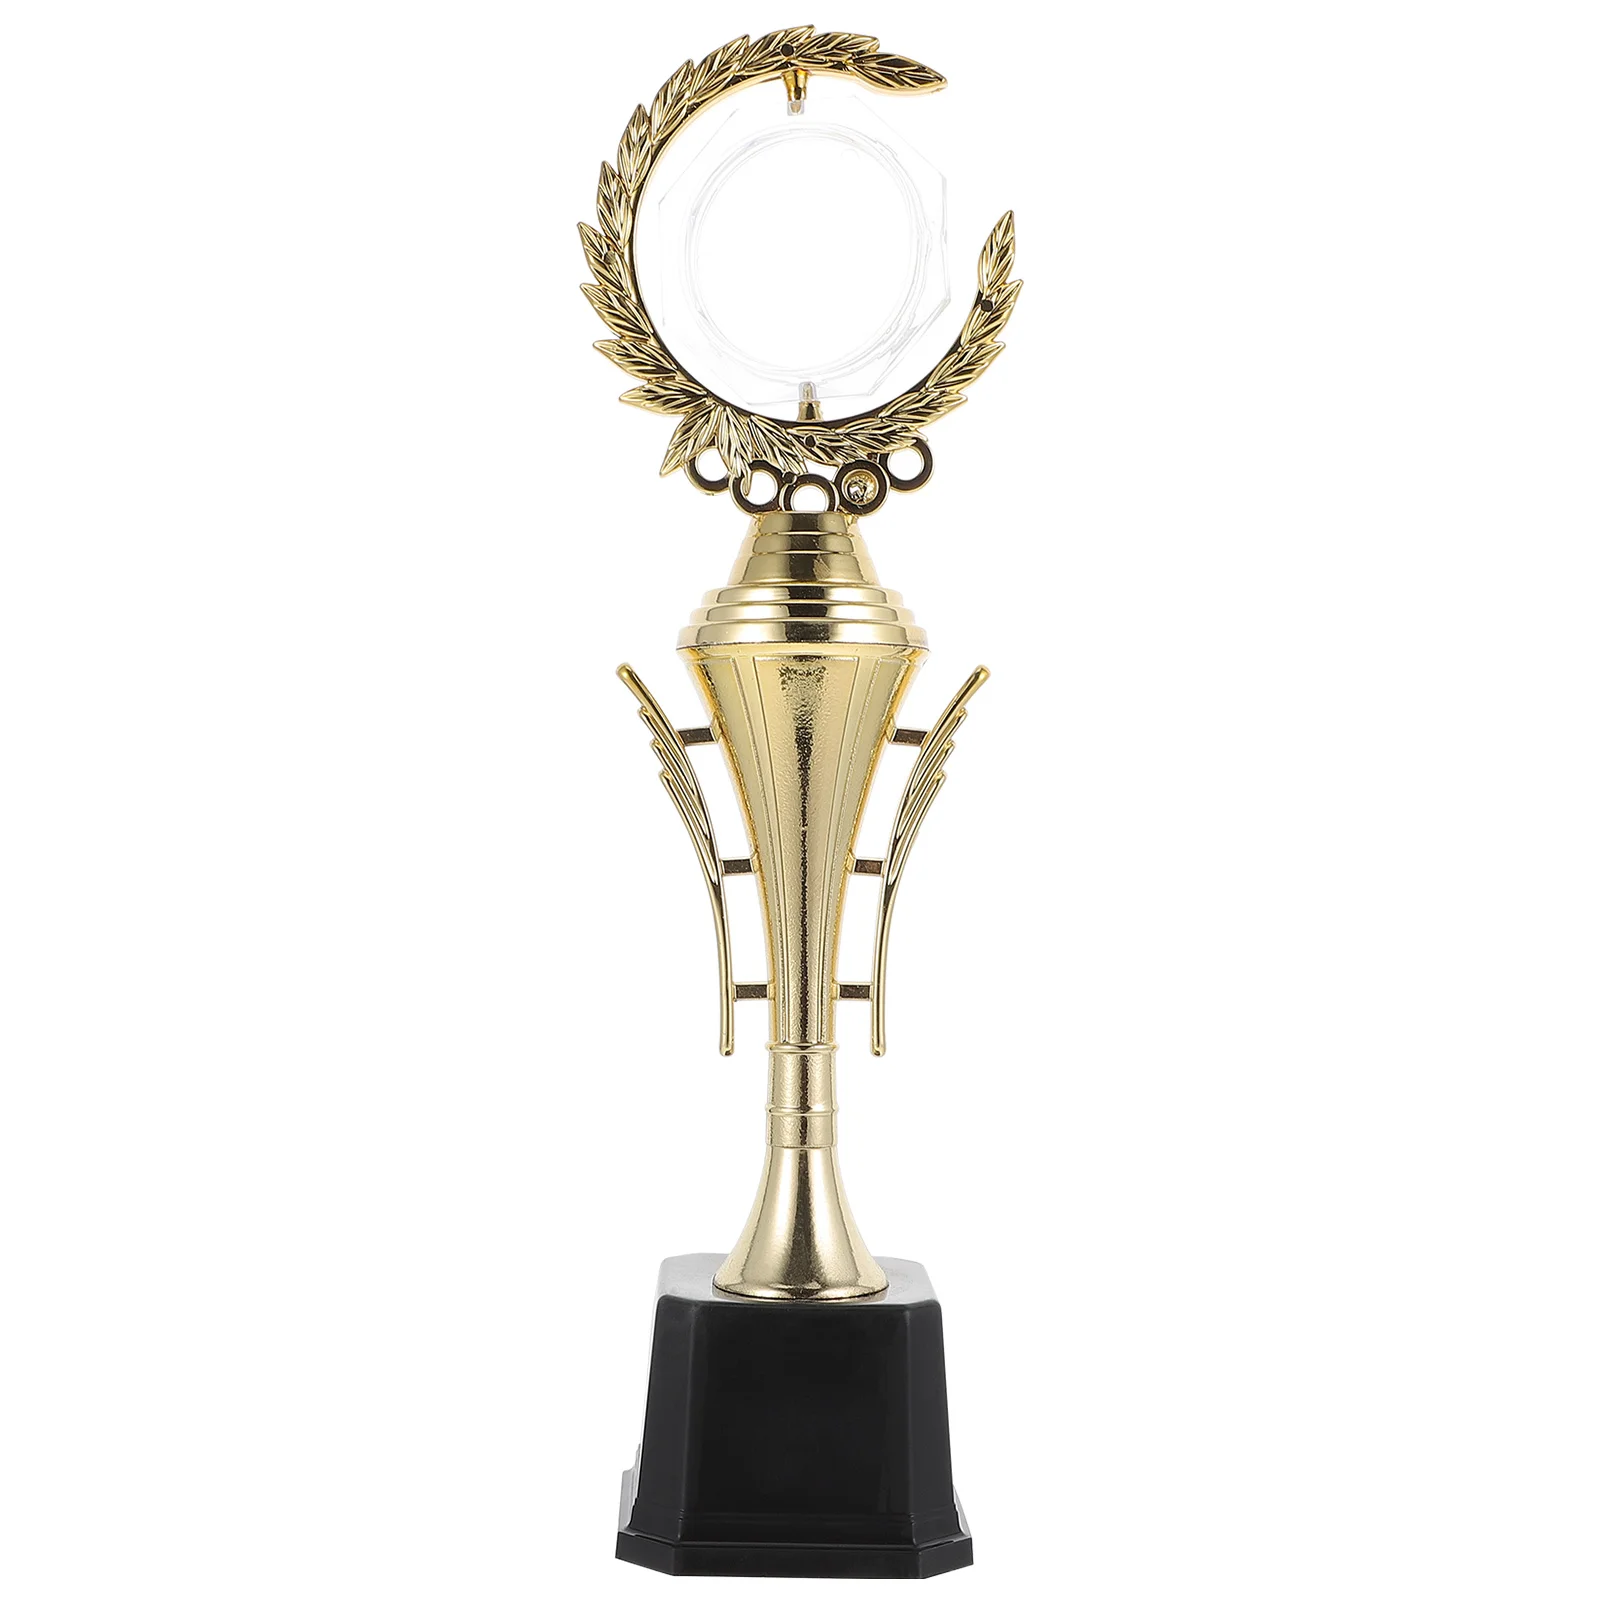 Trophy Award Universal Competition Trophies Adults Gold Reward Cup Plastic Winner Kids For Game Child